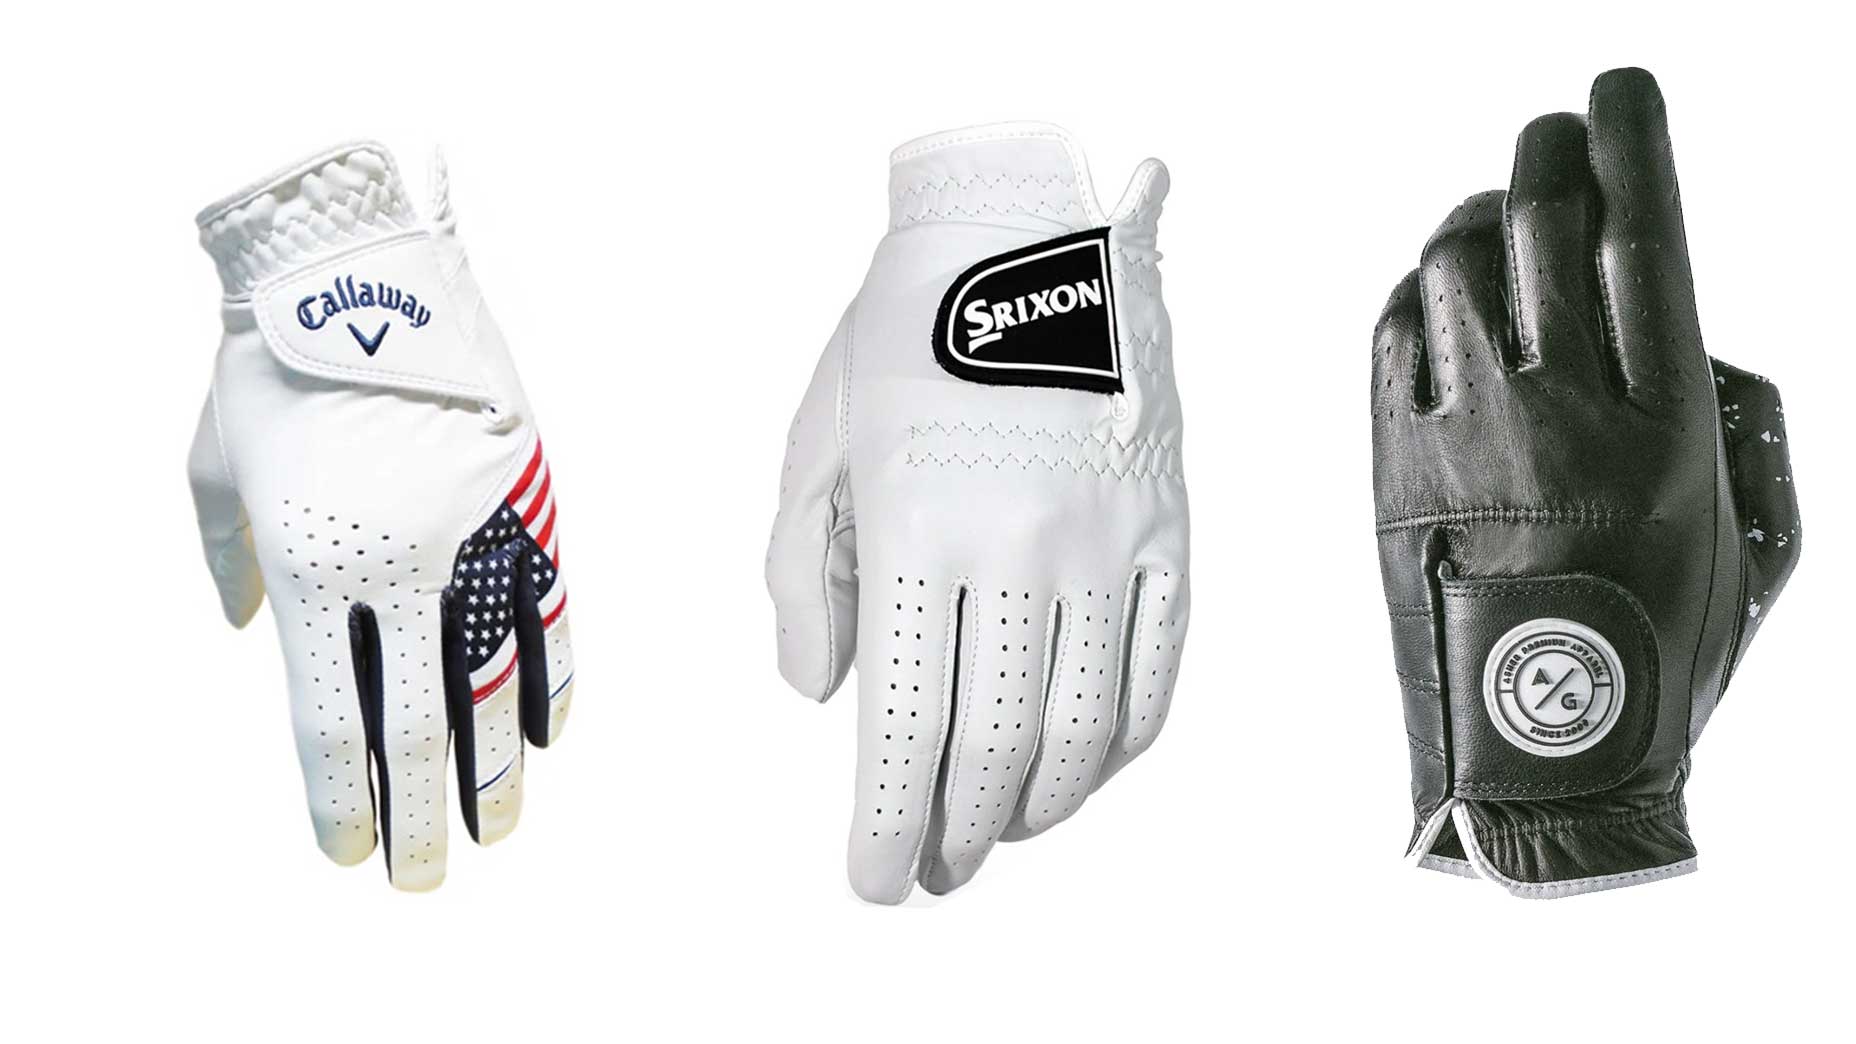 Editor's Picks: 5 golf gloves for top-notch performance on the course